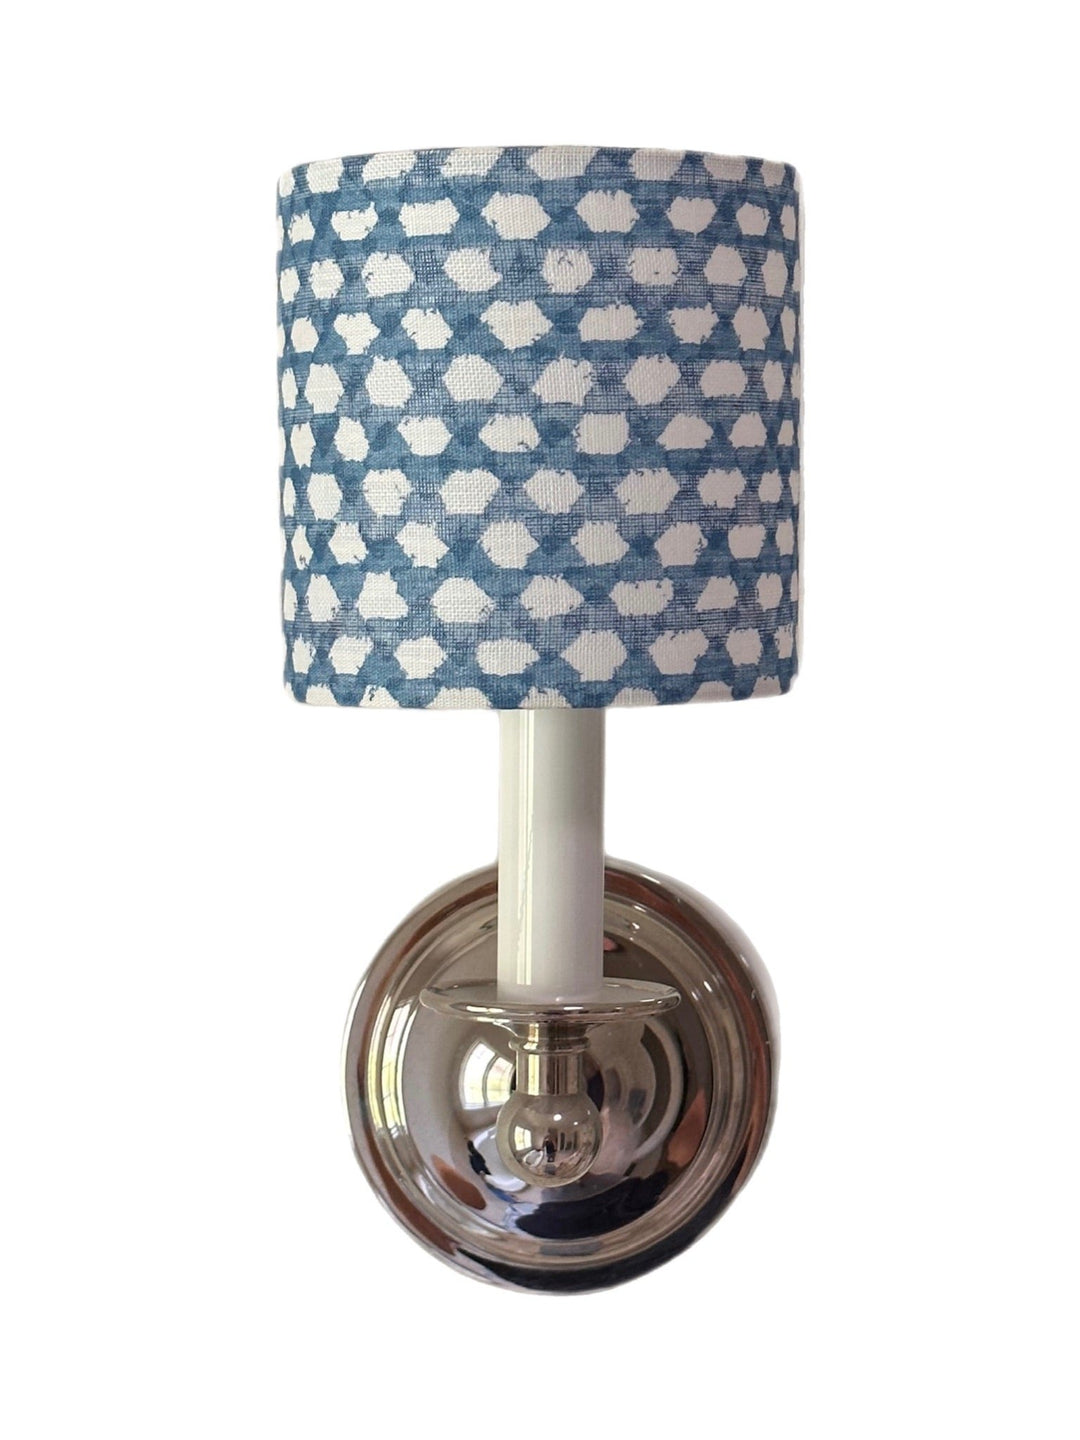 Custom Sconce Lamp Shade made with Fermoie Fabric - 5" Half Drum with Candle Clip (12 shades in stock) - Lux Lamp Shades